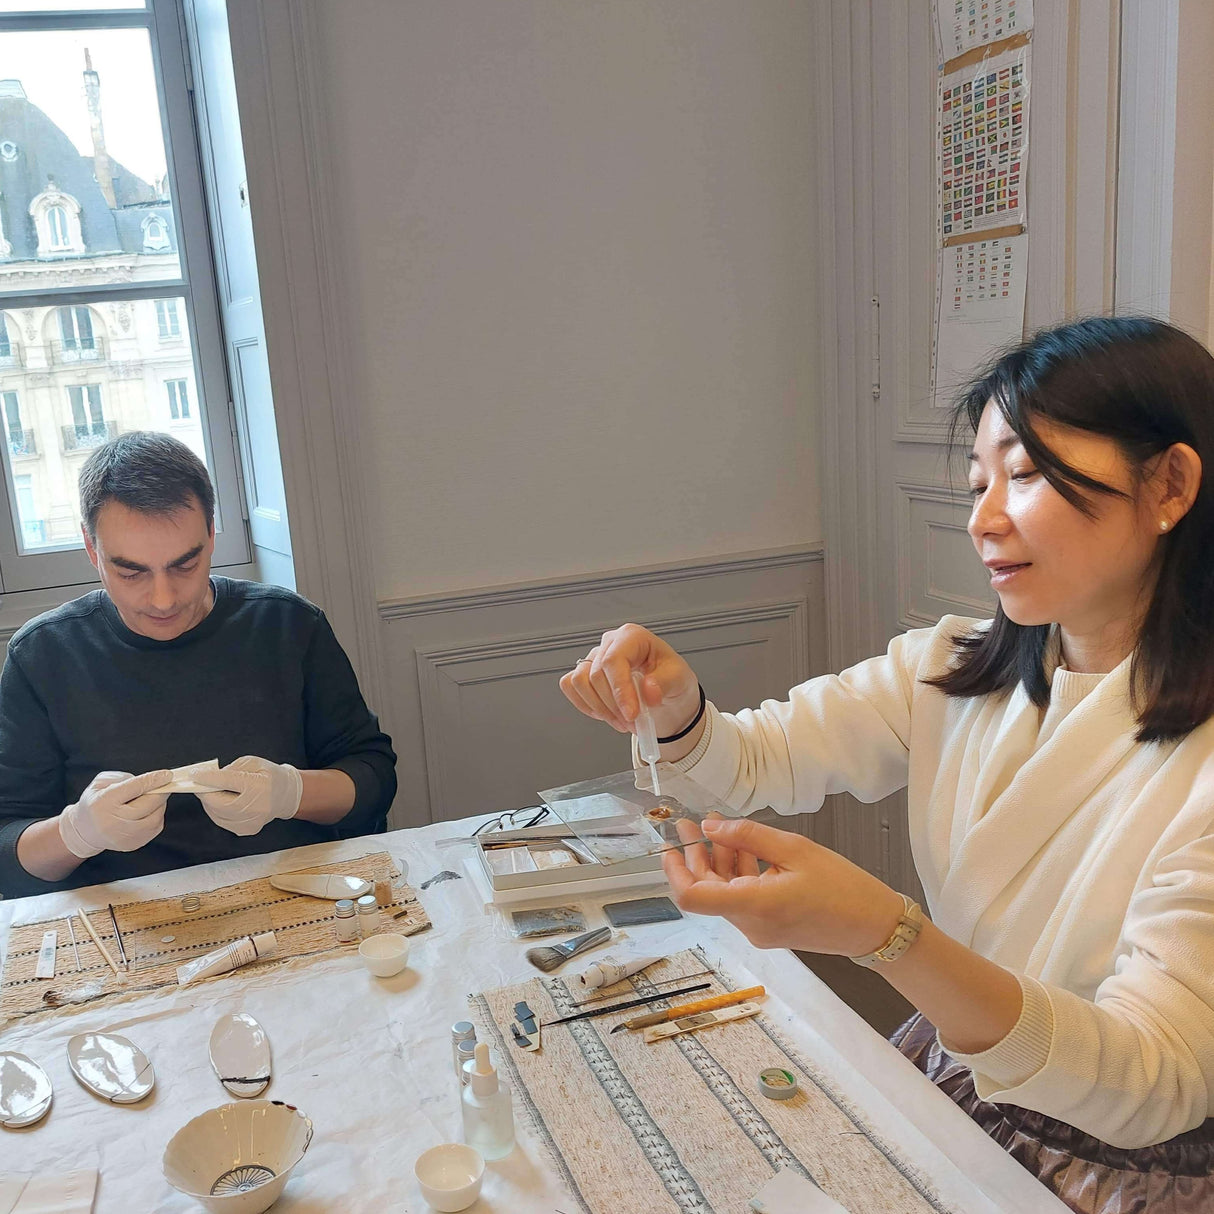 Kintsugi - A Series of Workshops with Ai Shimizu | May 11-12